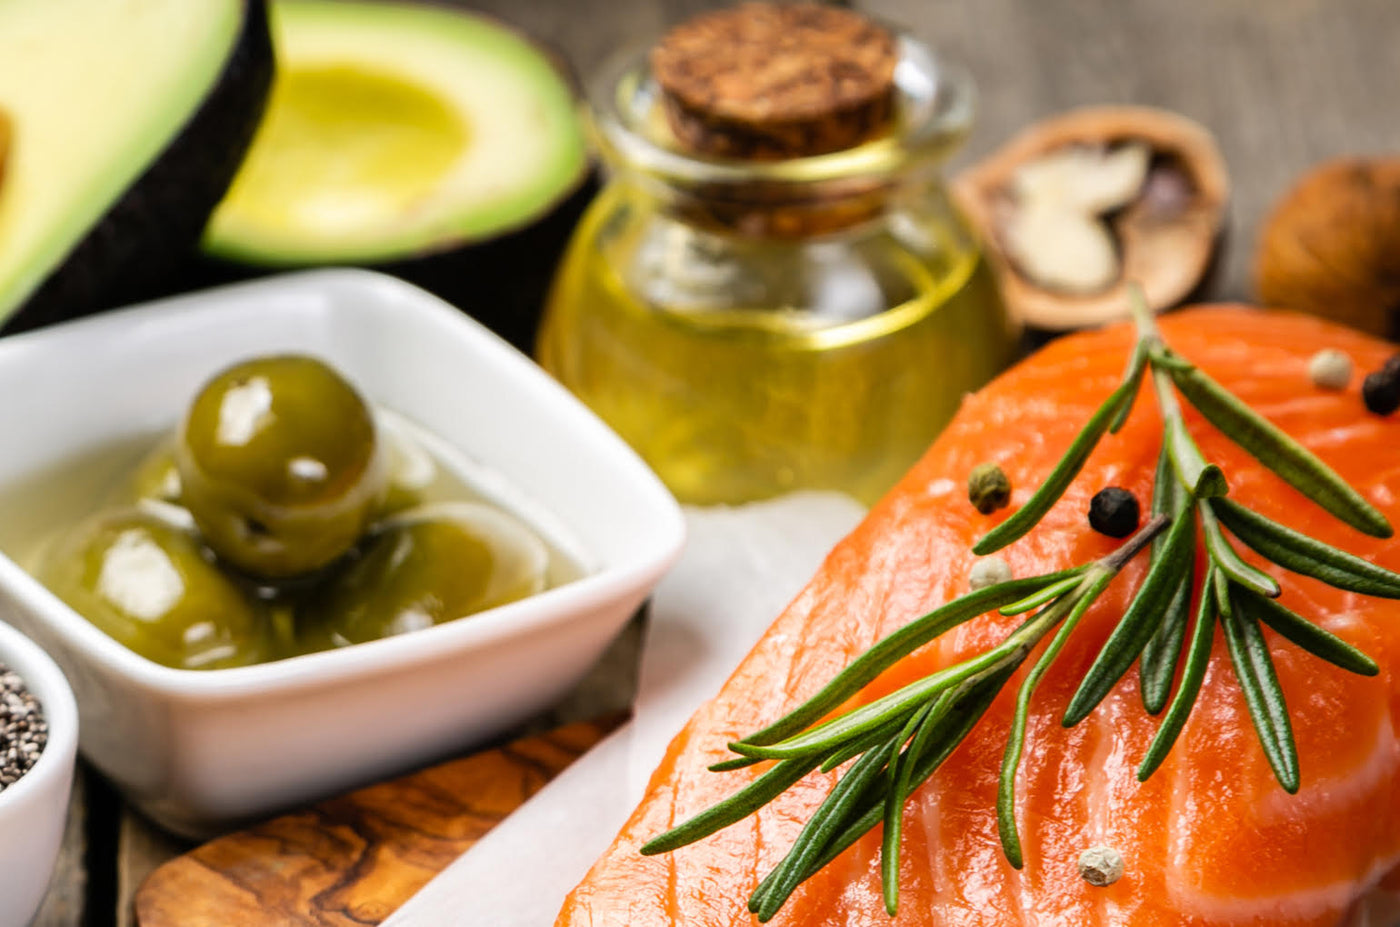 Omega 3 vs 6 vs 9: Benefits and Differences